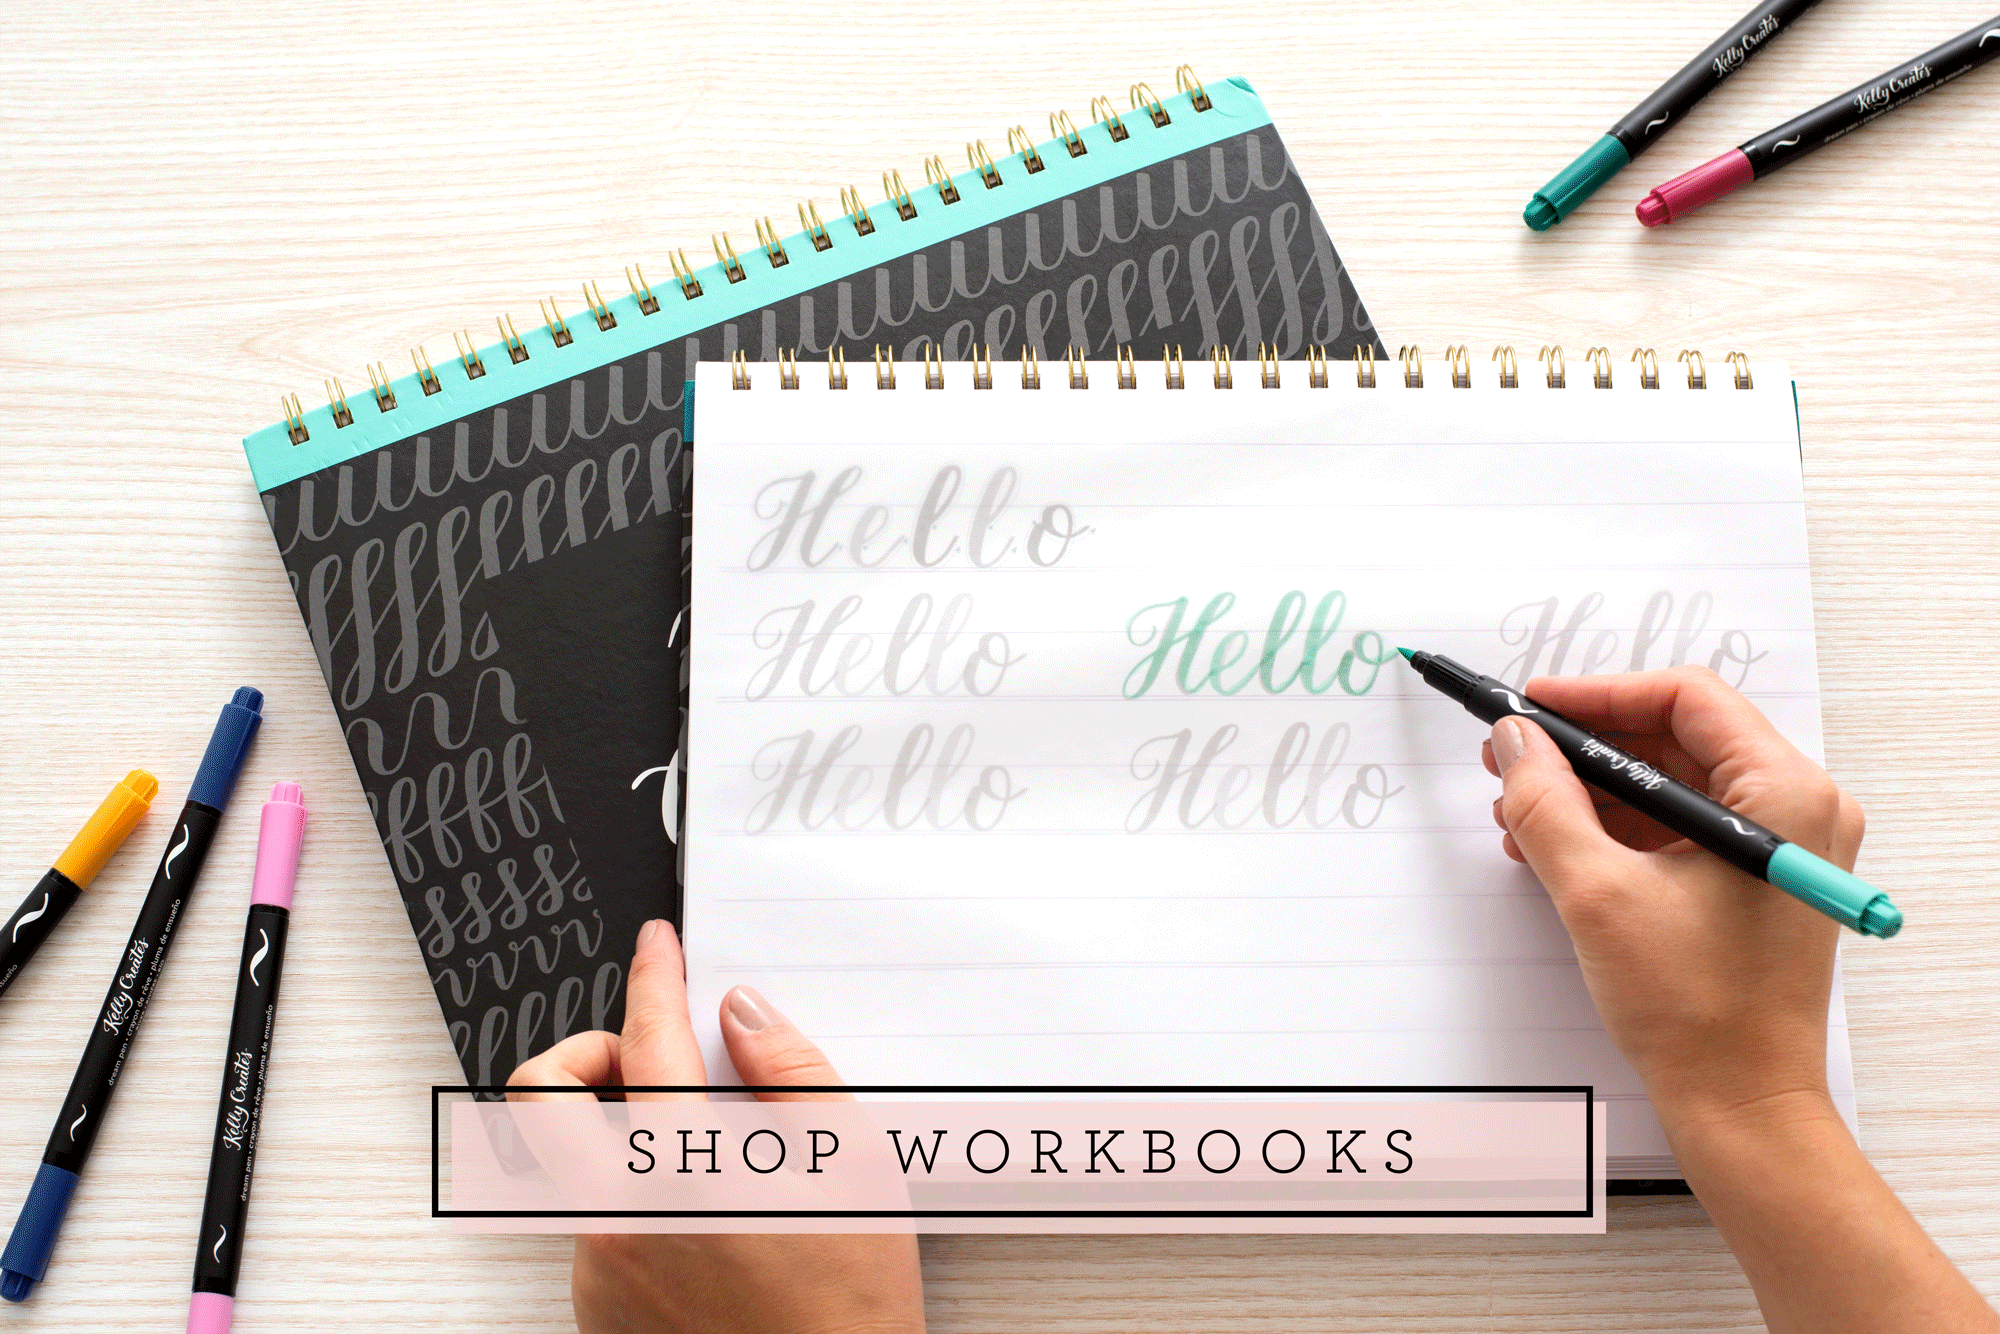 Brush Lettering 101 with Kelly Creates 